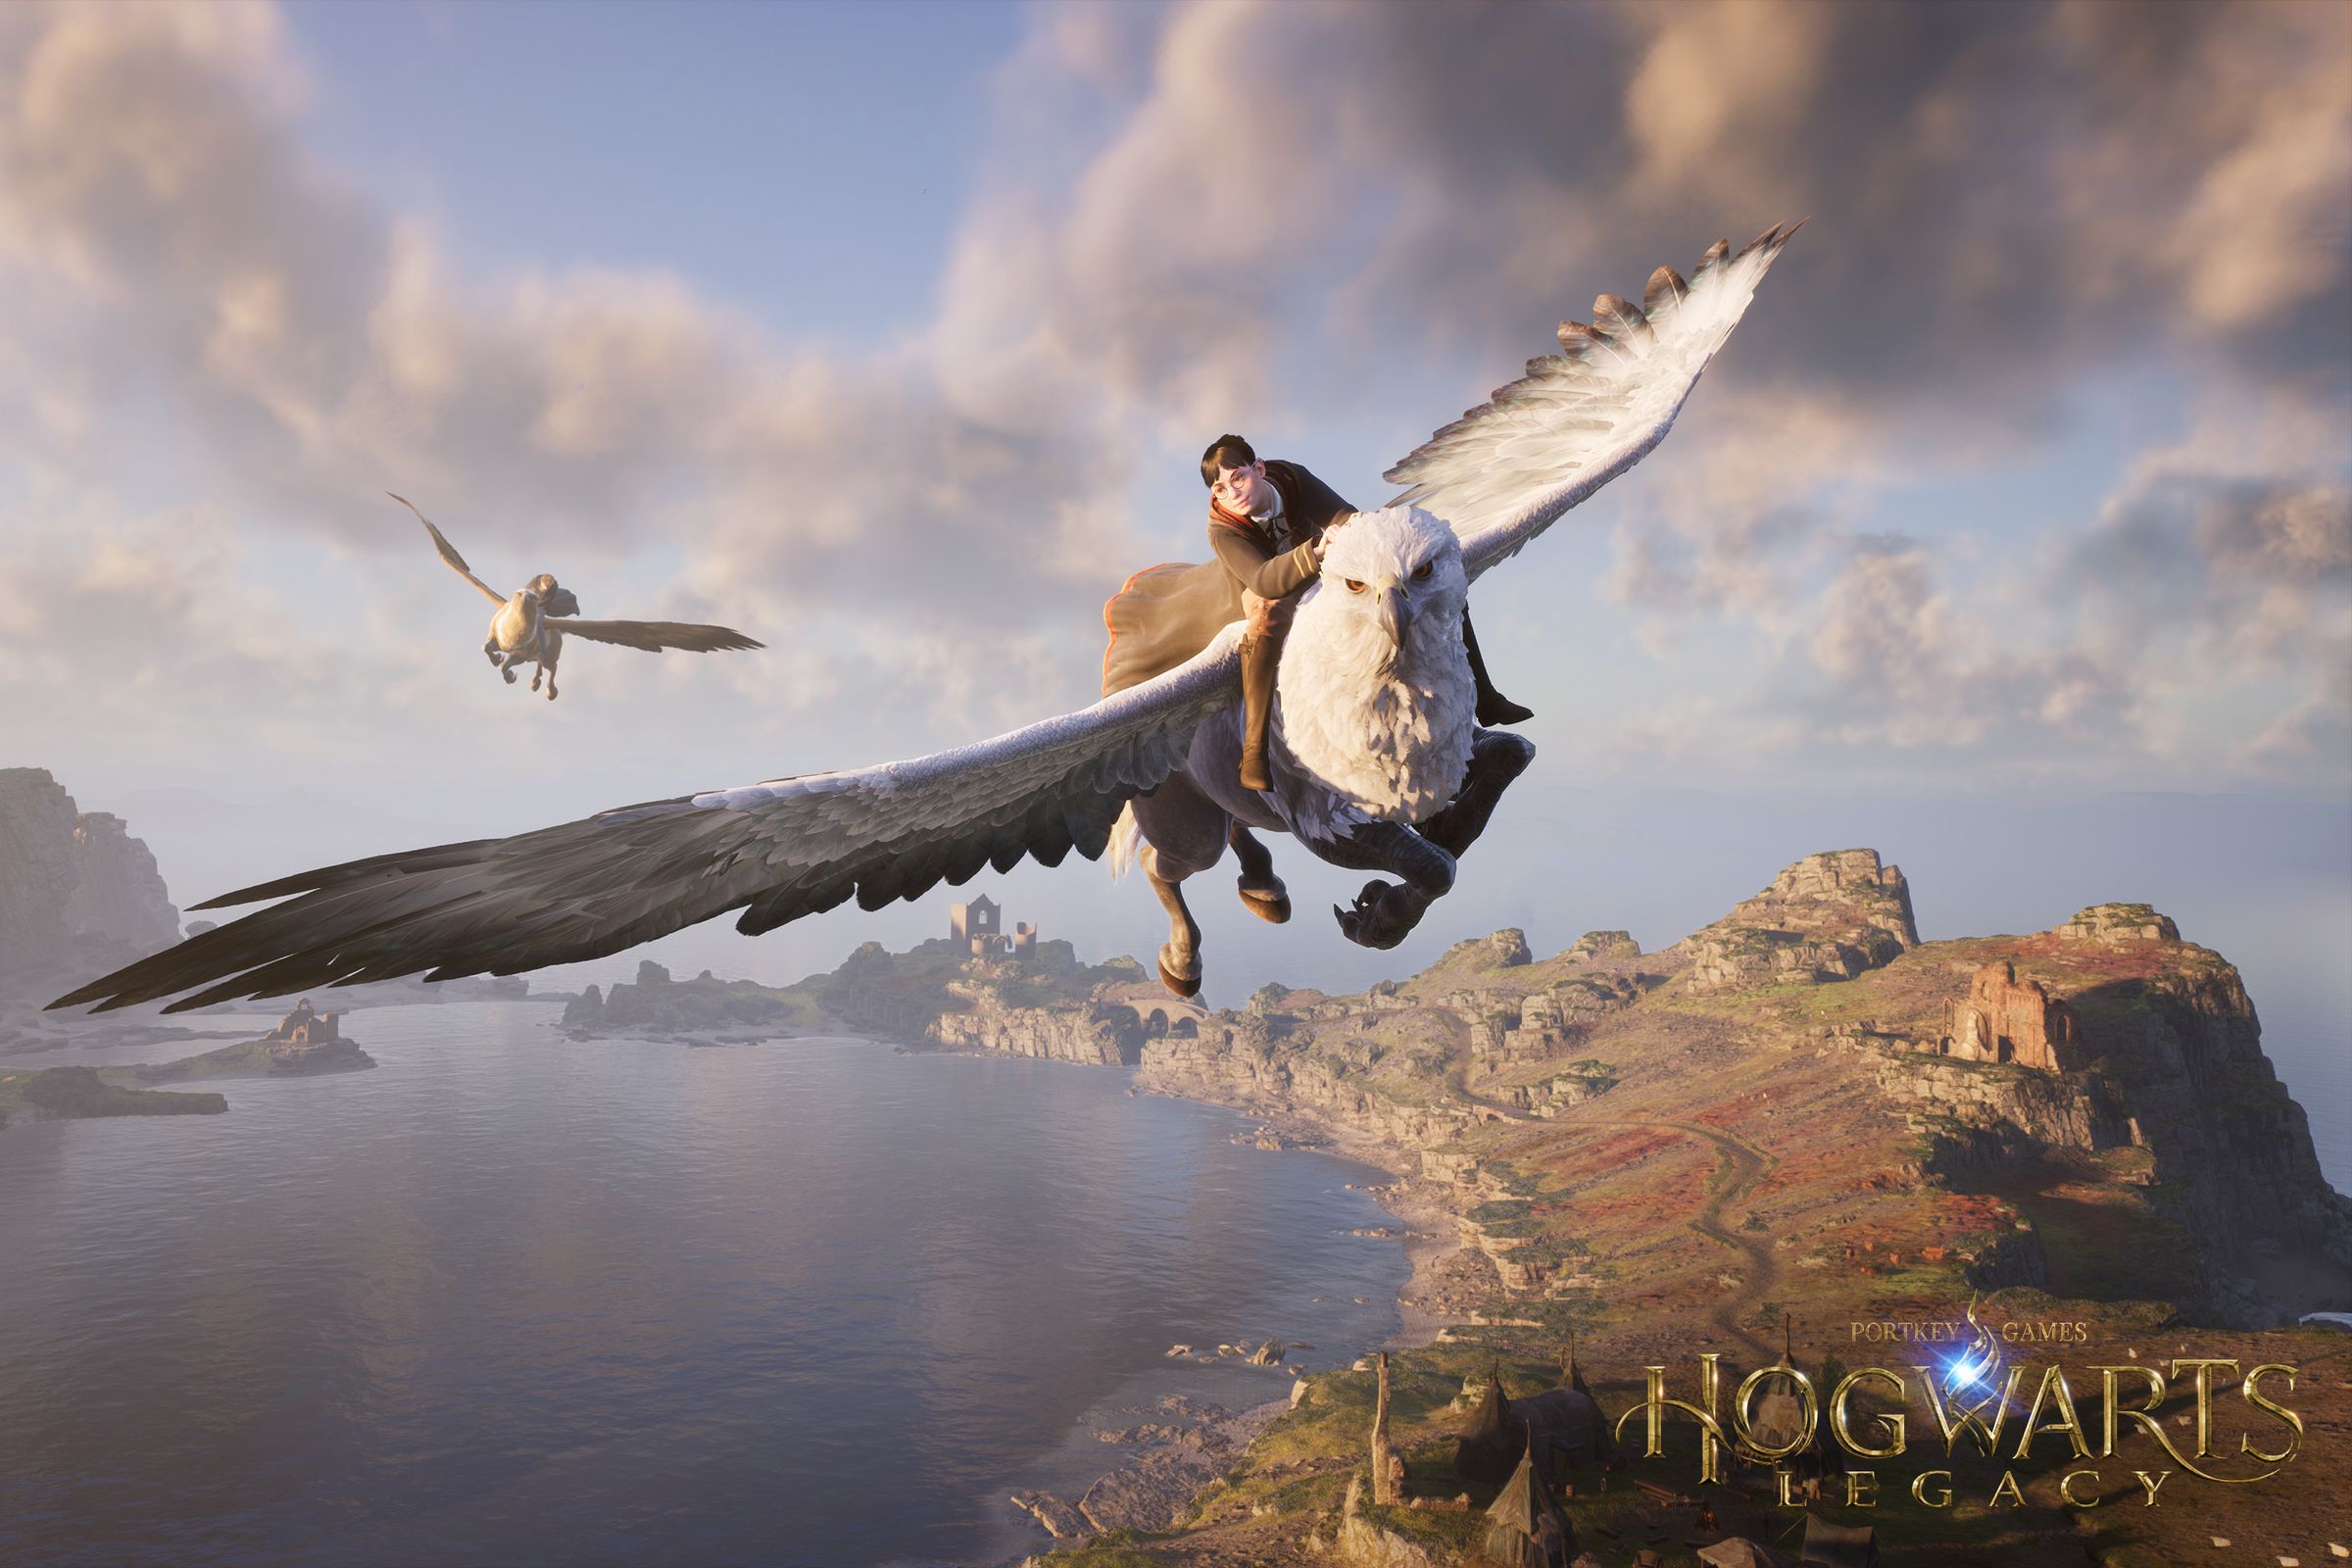 Screenshot from Hogwarts Legacy depicting a student in robes flying on a feathered hypogriff creature